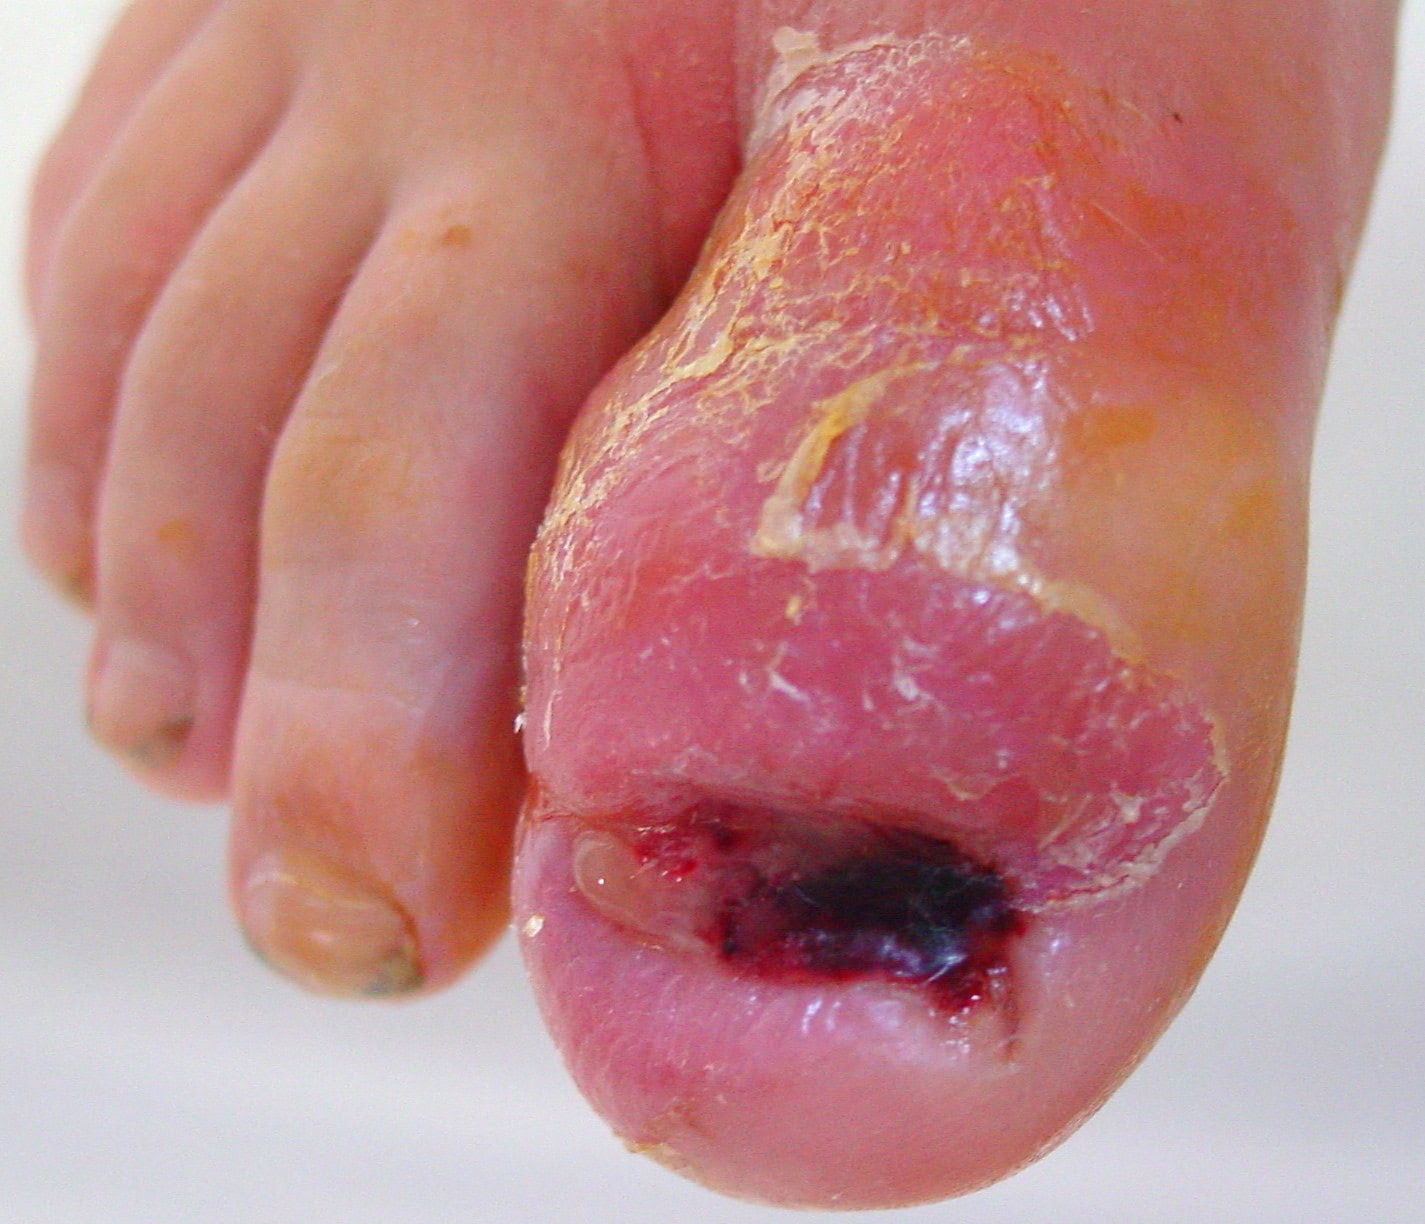 Toenail infections pictures - Awesome Nail